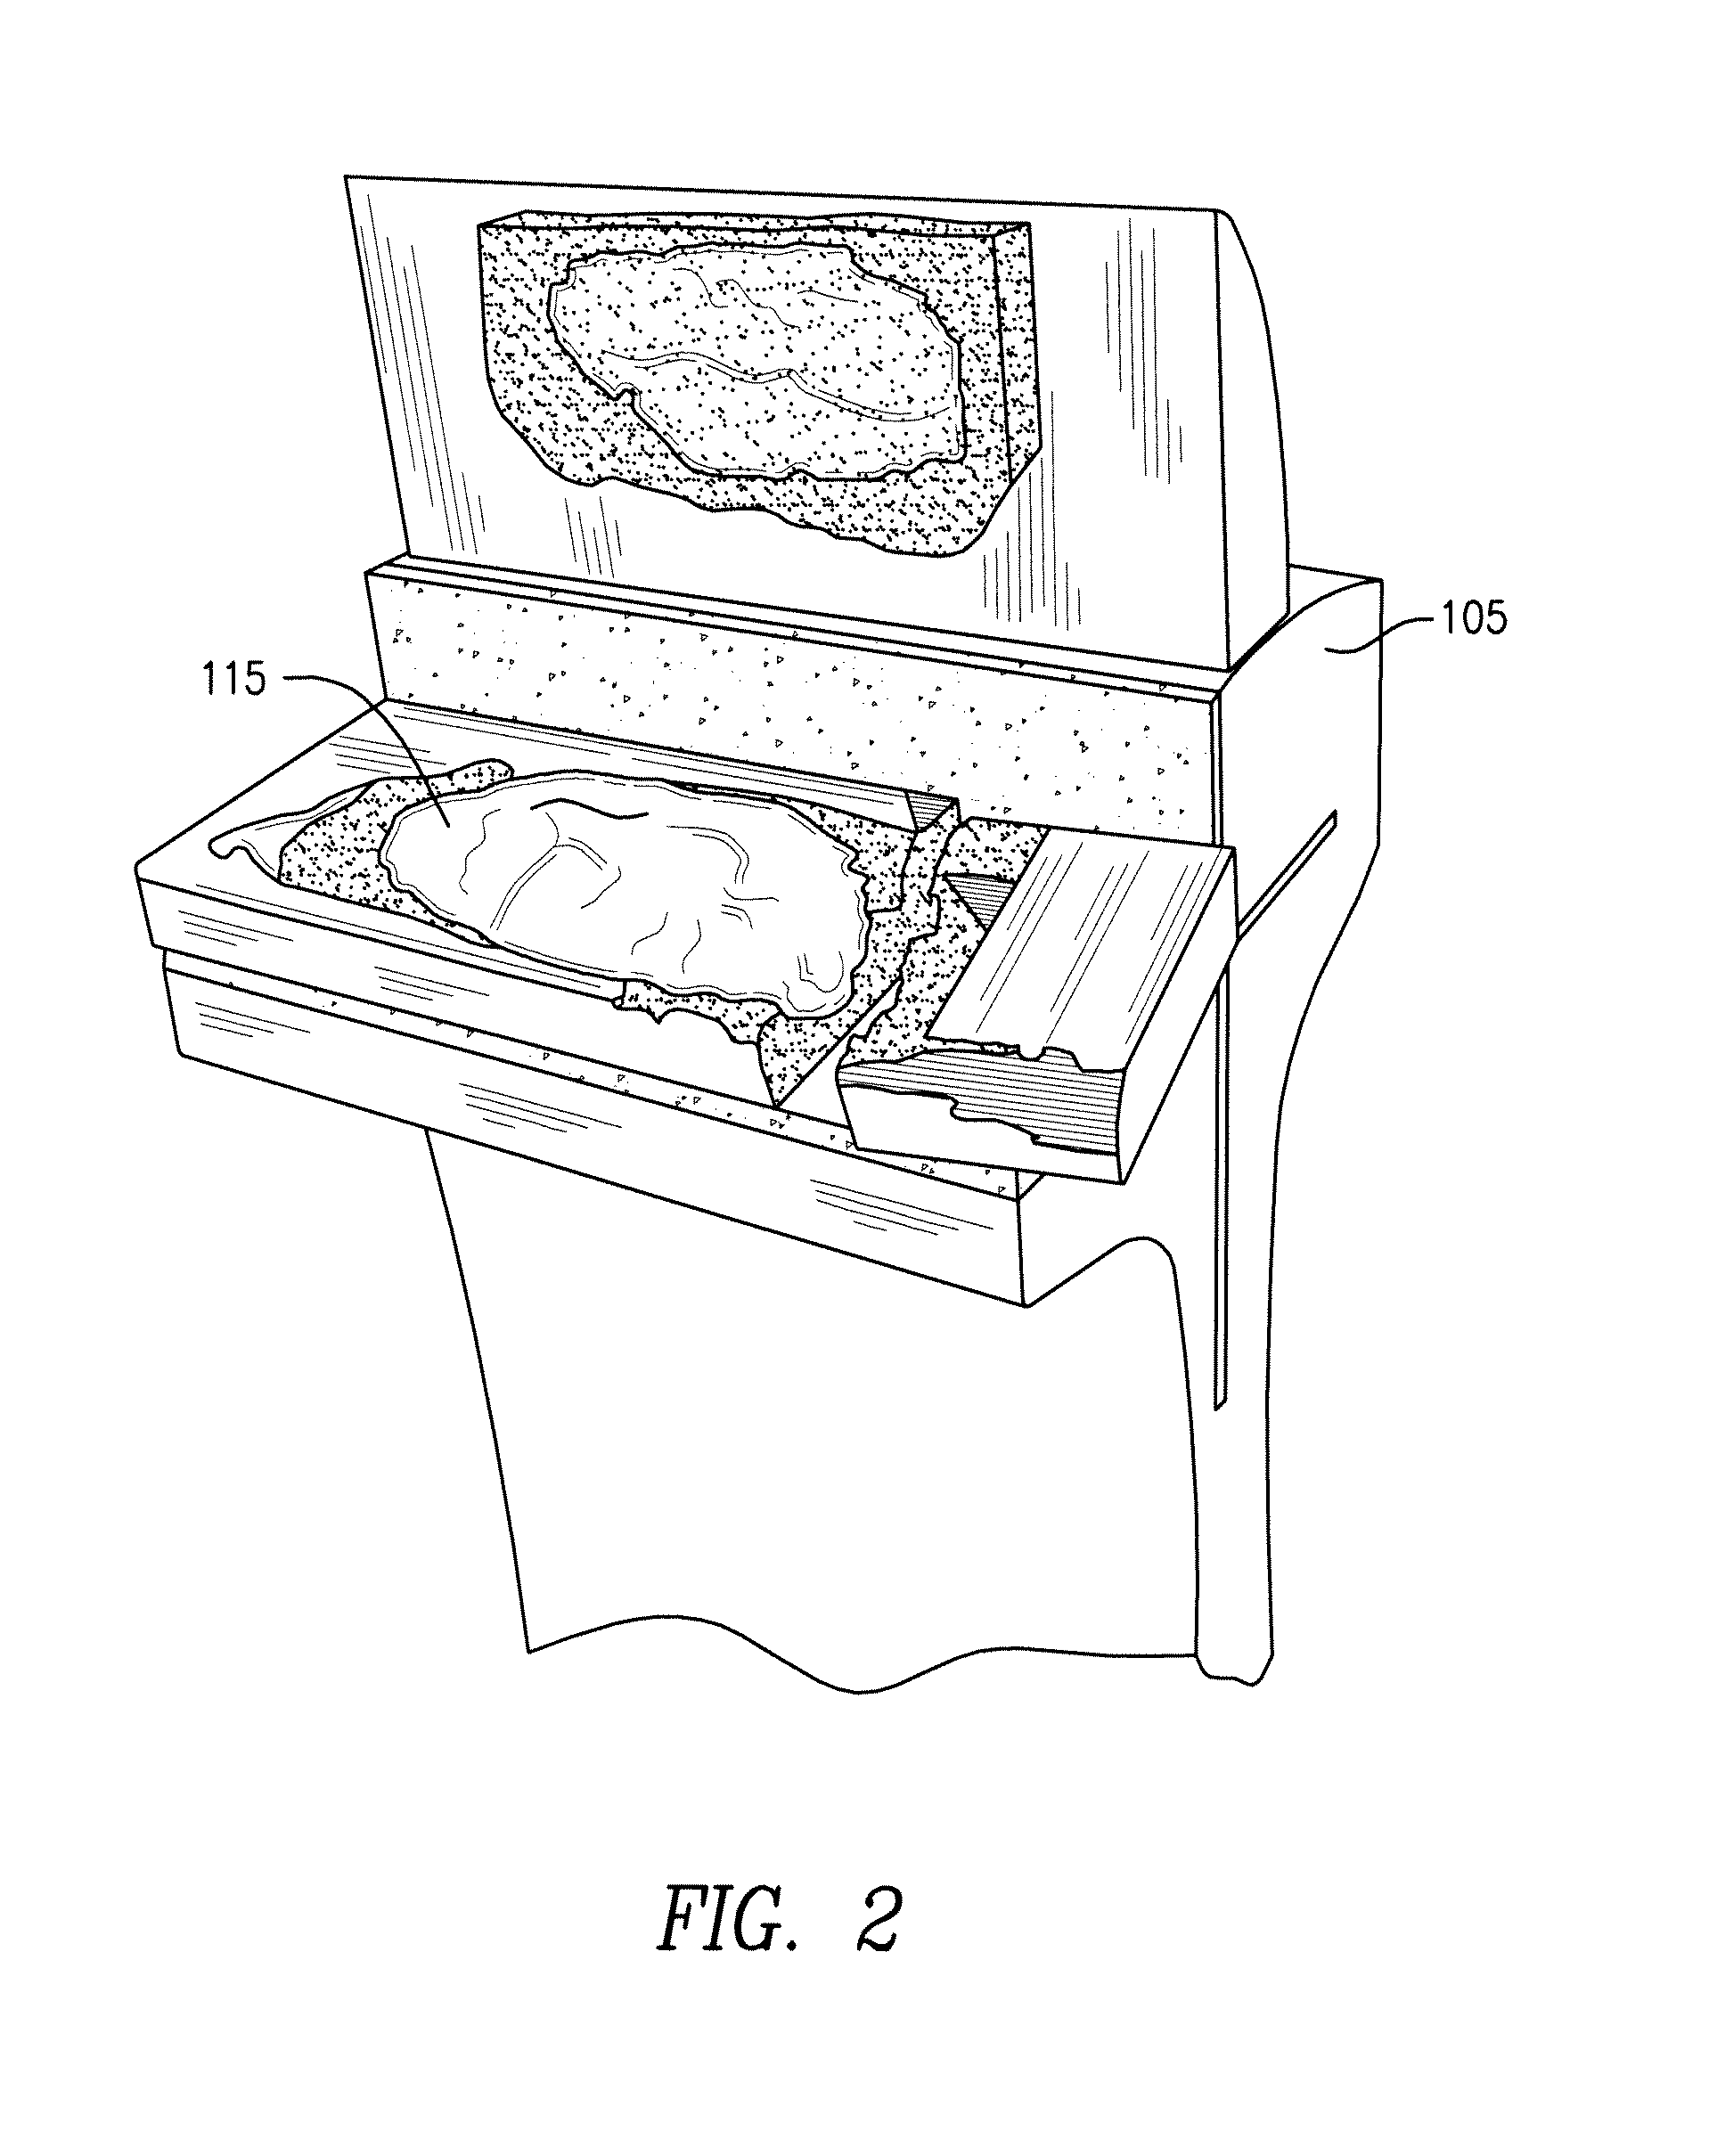 Method and apparatus for detecting internal rail defects